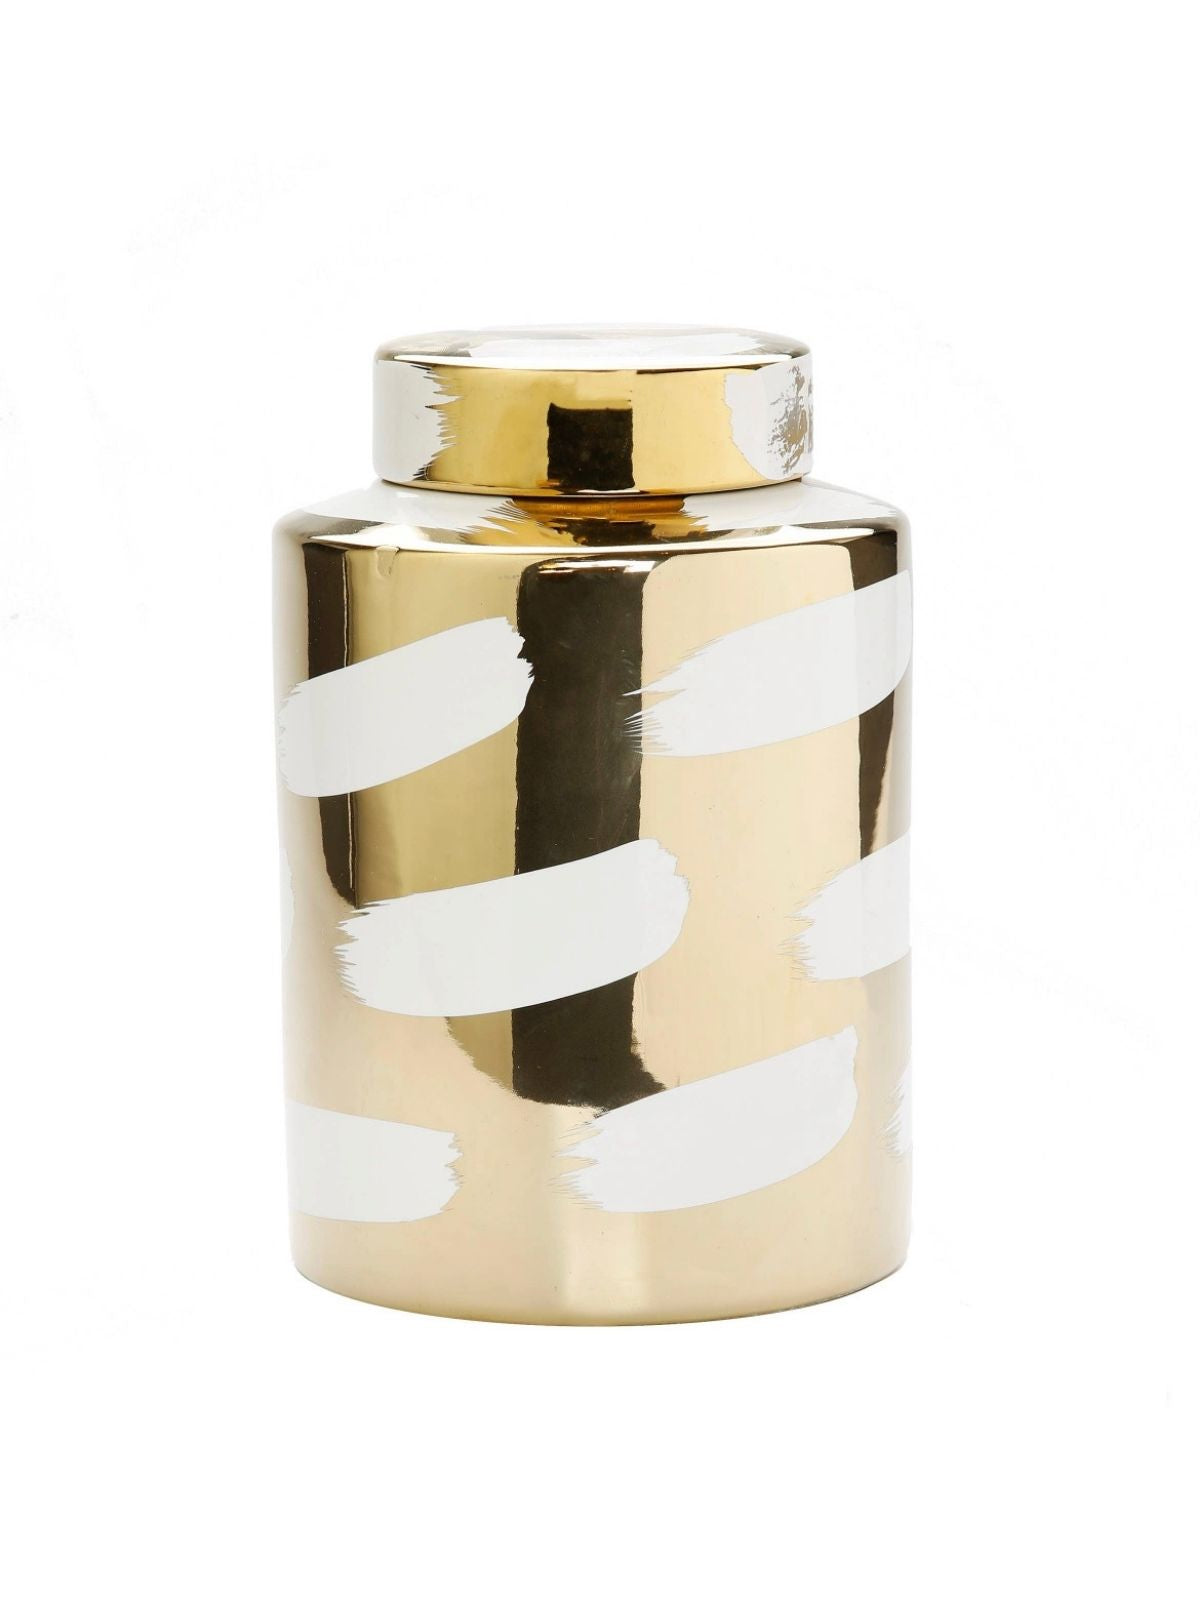 7H Gold Ceramic Decorative Jar With Lid and Luxurious White Brushstroke Design - KYA Home Decor